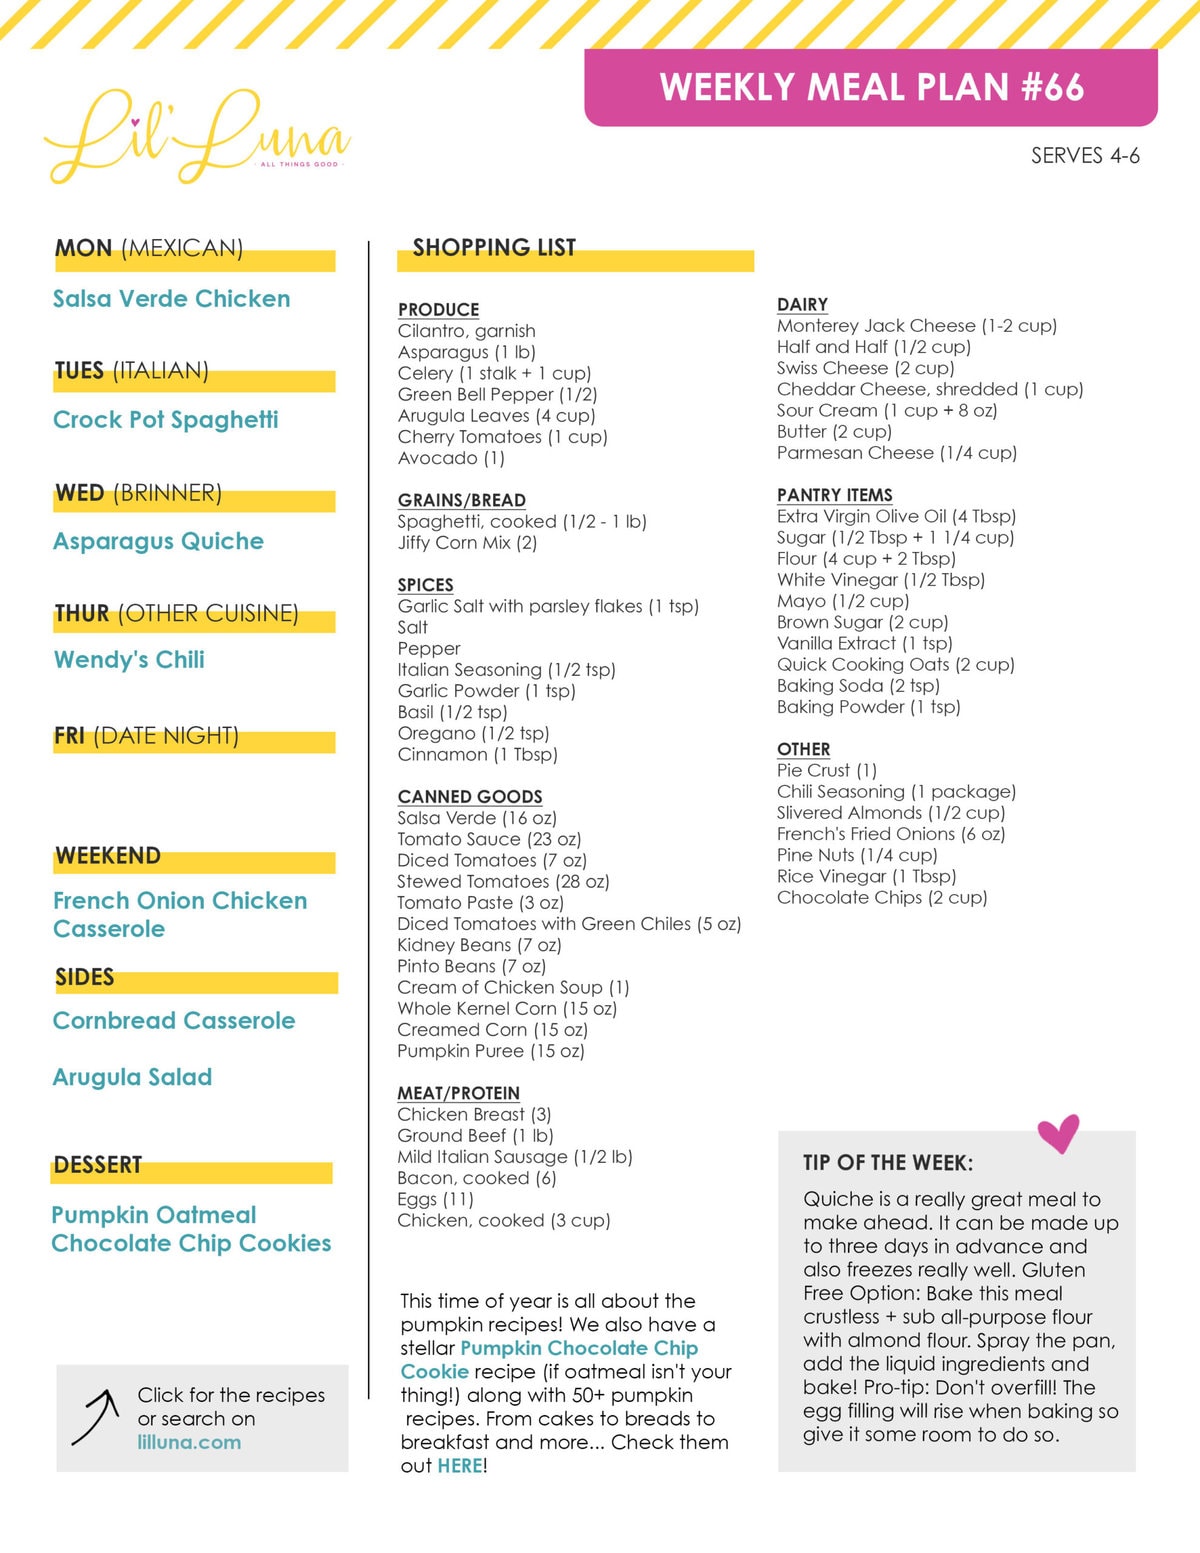 Printable version of Meal Plan #66 with grocery list.